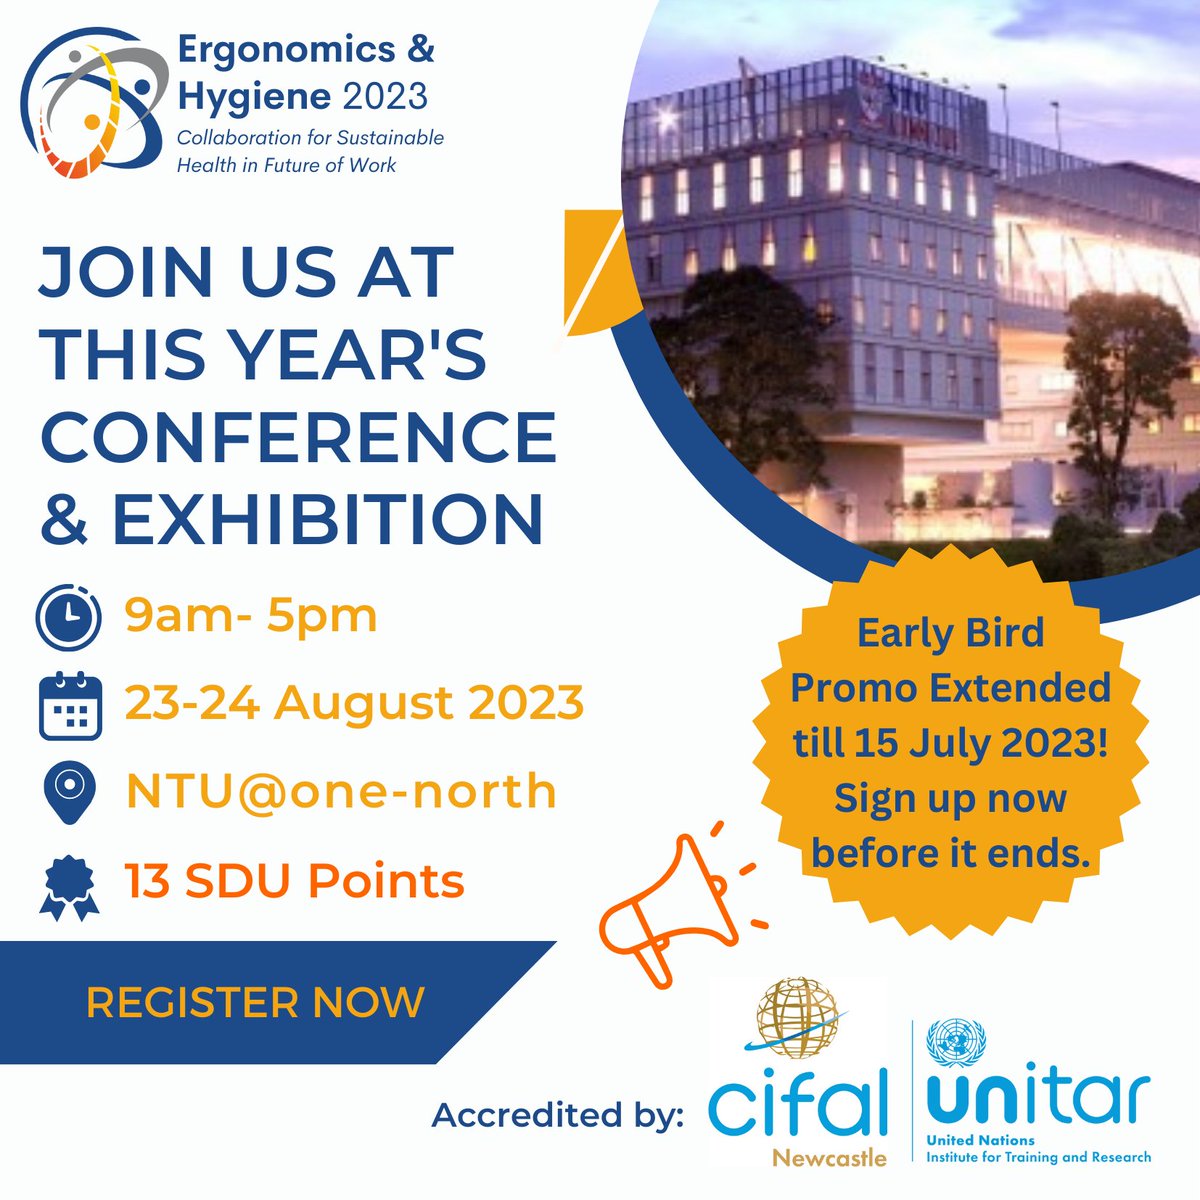 Thank you for the overwhelming response. 
We have extended the early bird promo till 15 July.
Do sign up before the promo ends!
For more information, visit: ergonomicshygiene.org

#conference #ergonomics #occupationalhygiene #unitar #cifal #sdu #exhibition